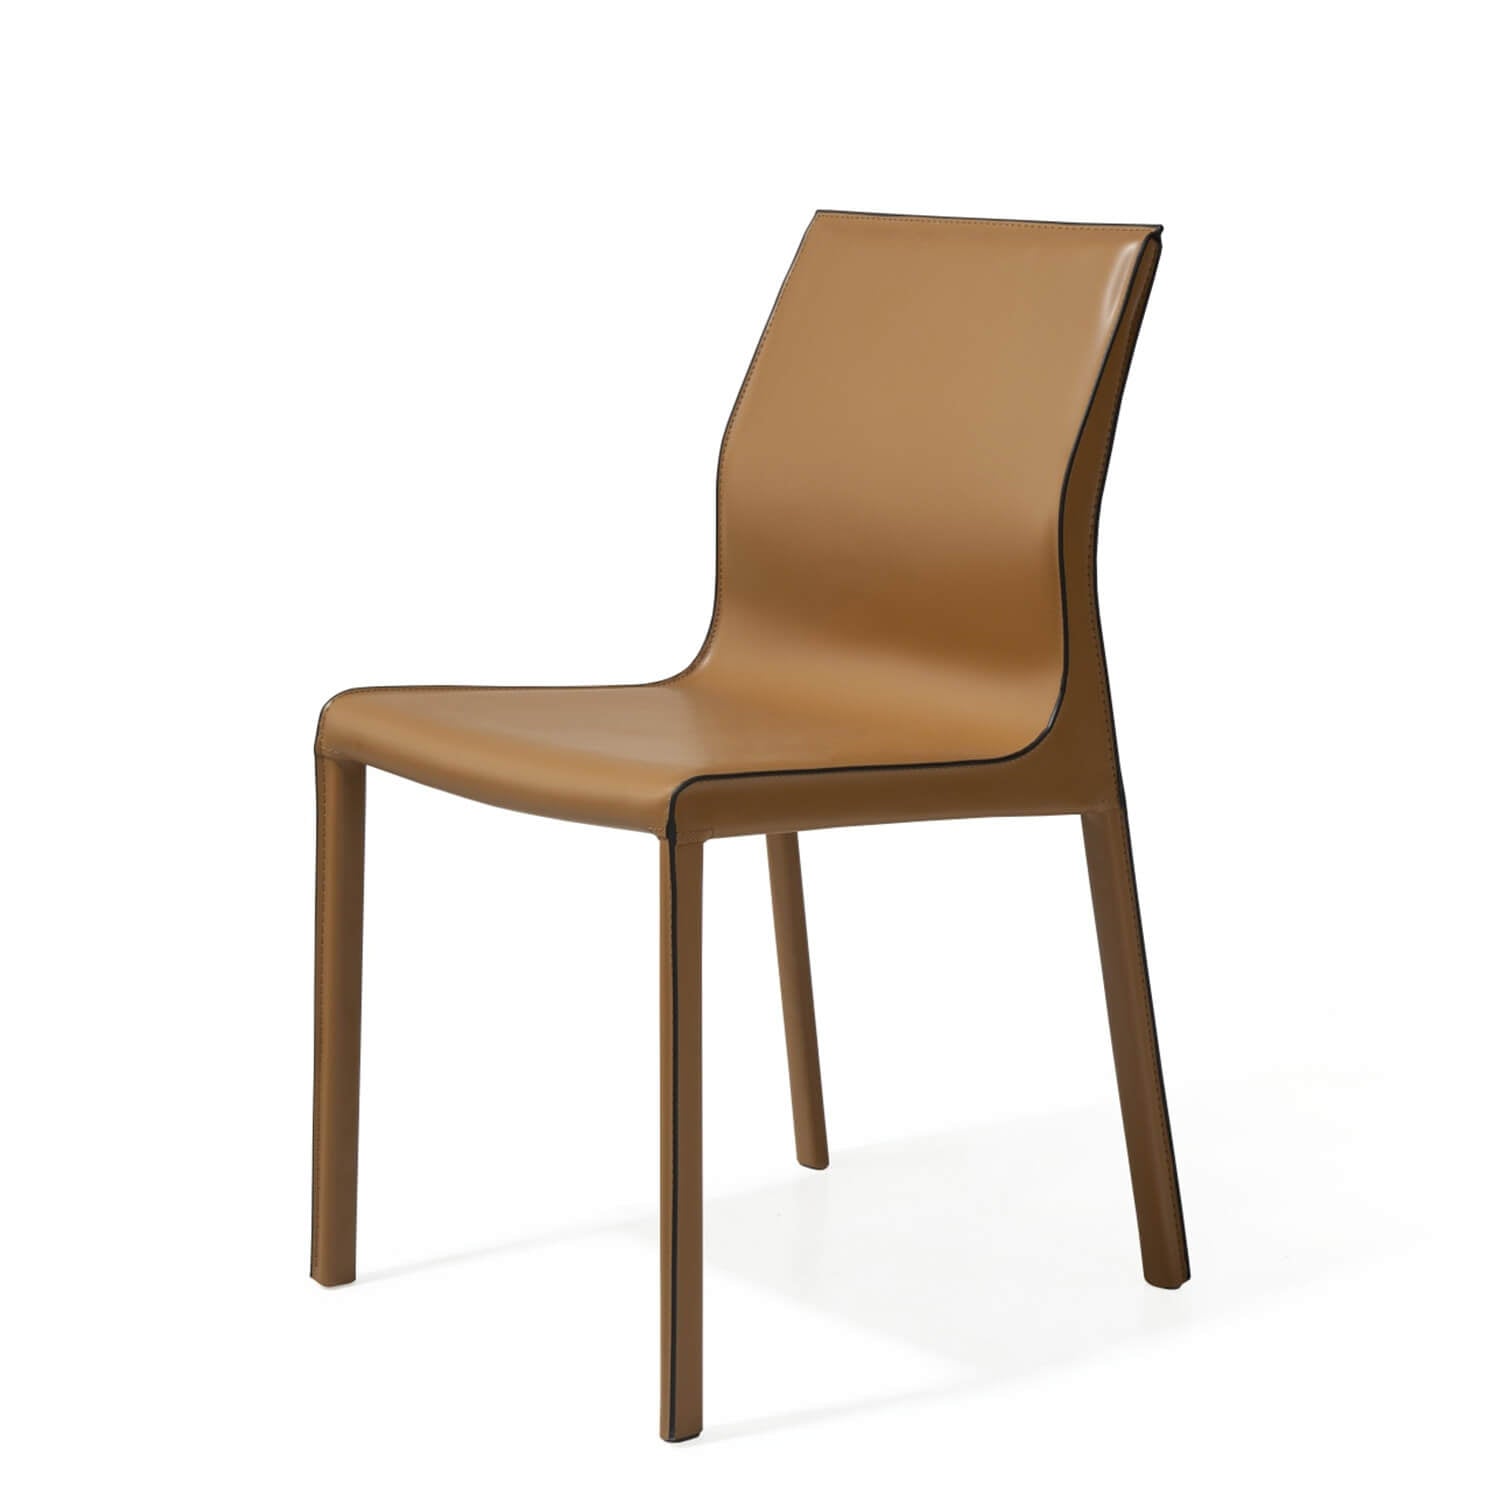 Orte dining chair